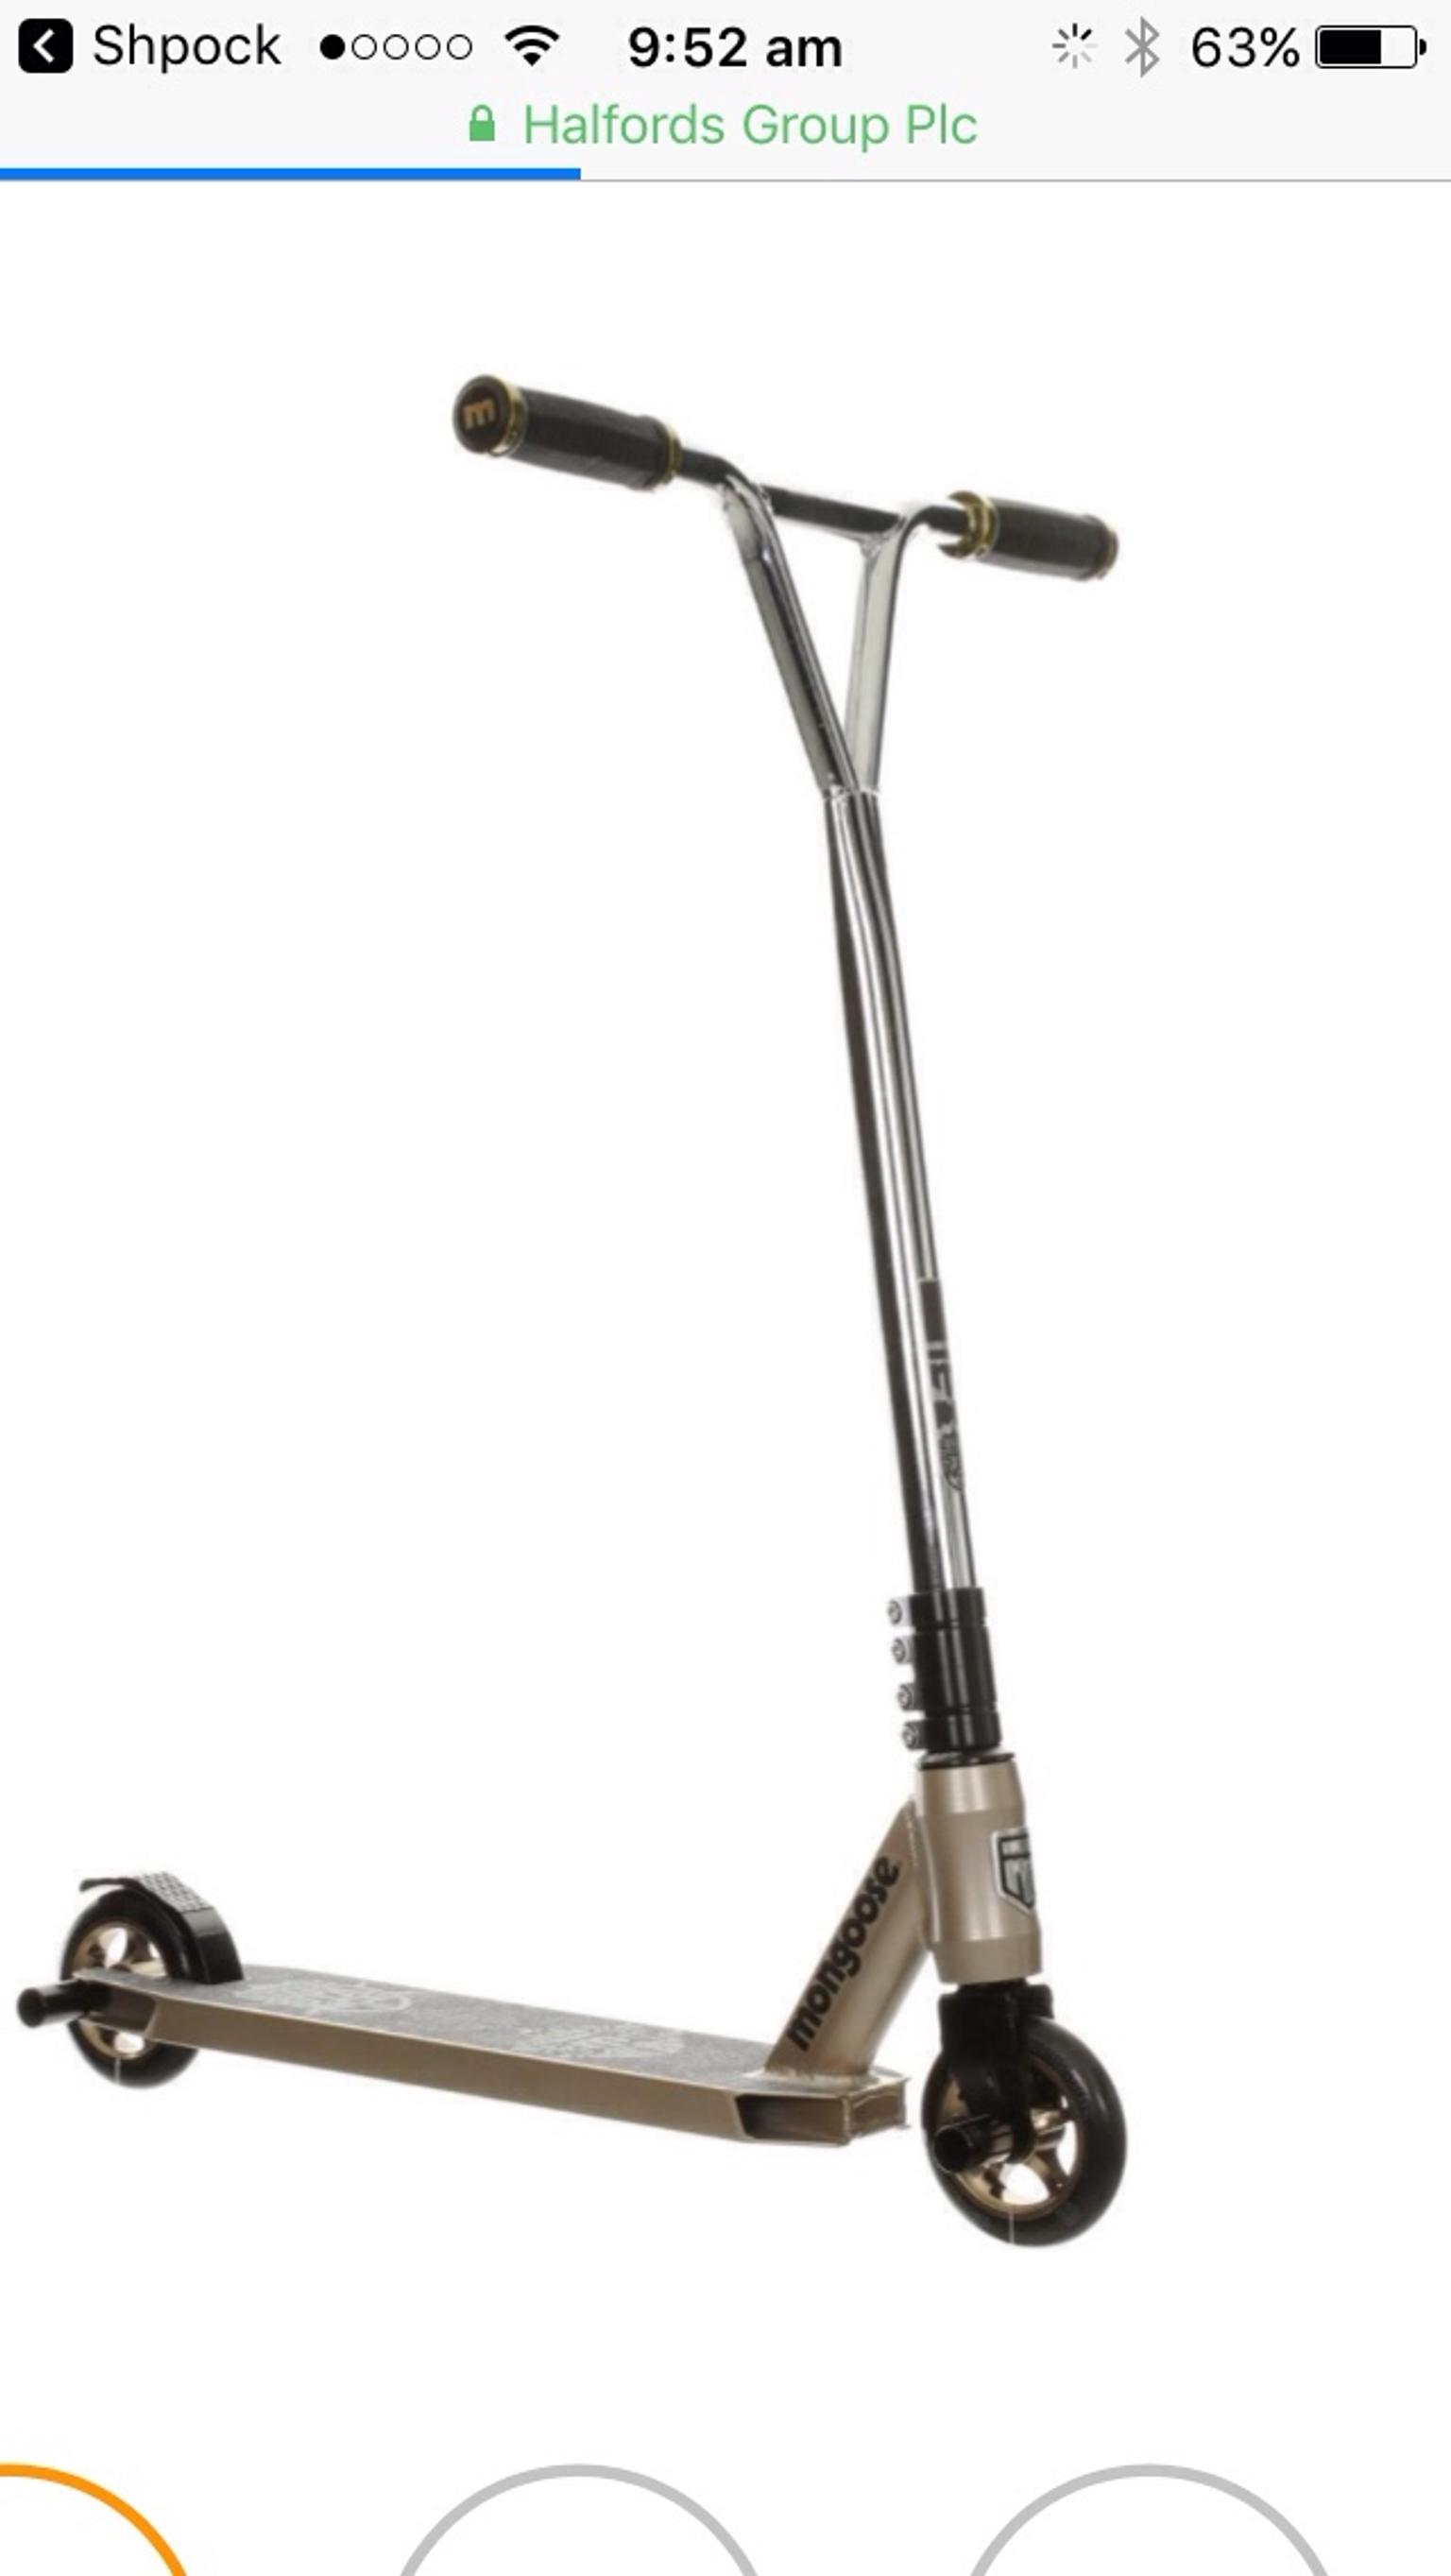 mongoose stunt scooter